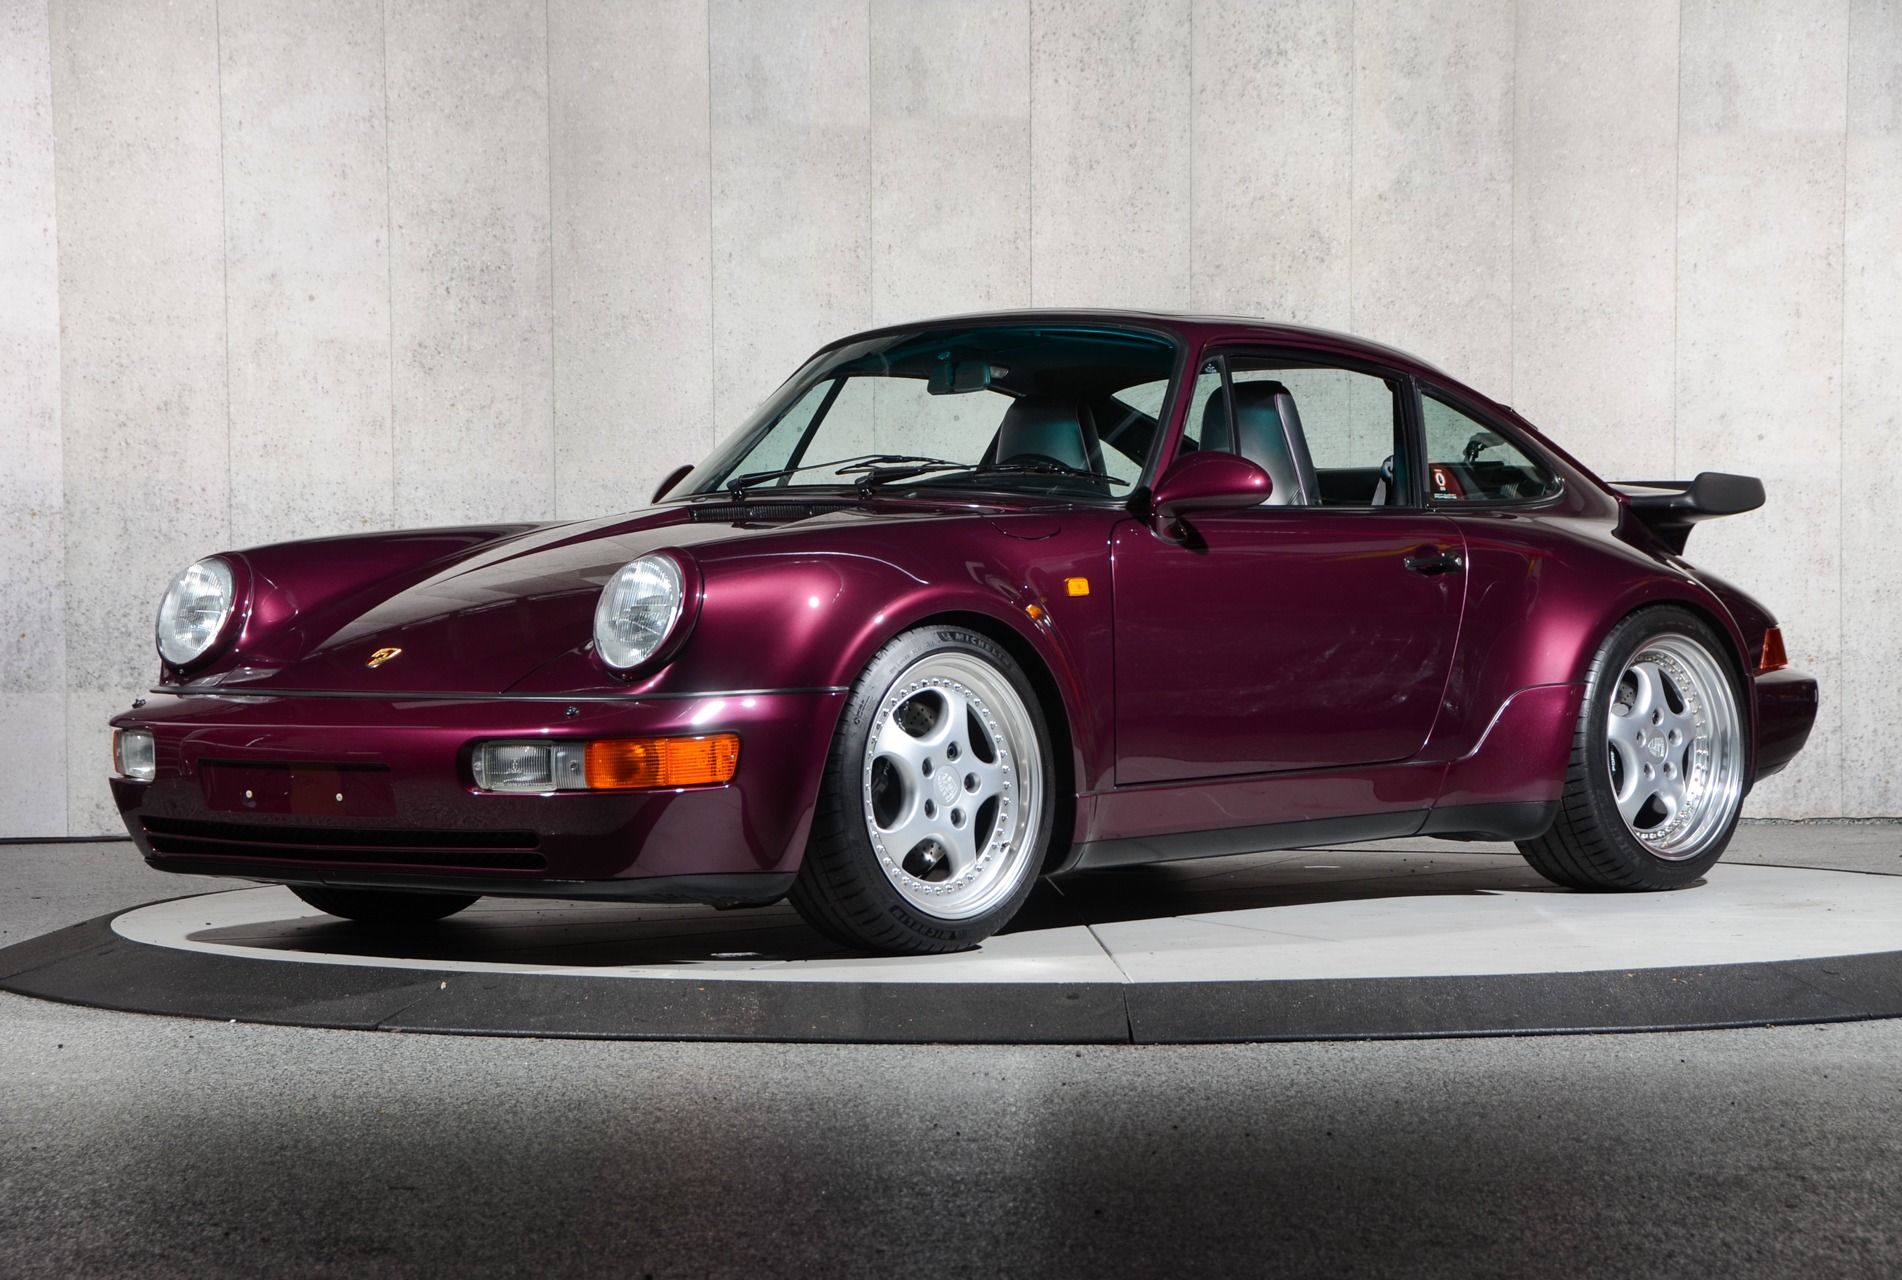 Used 1991 Porsche 911 Turbo For Sale (Sold)